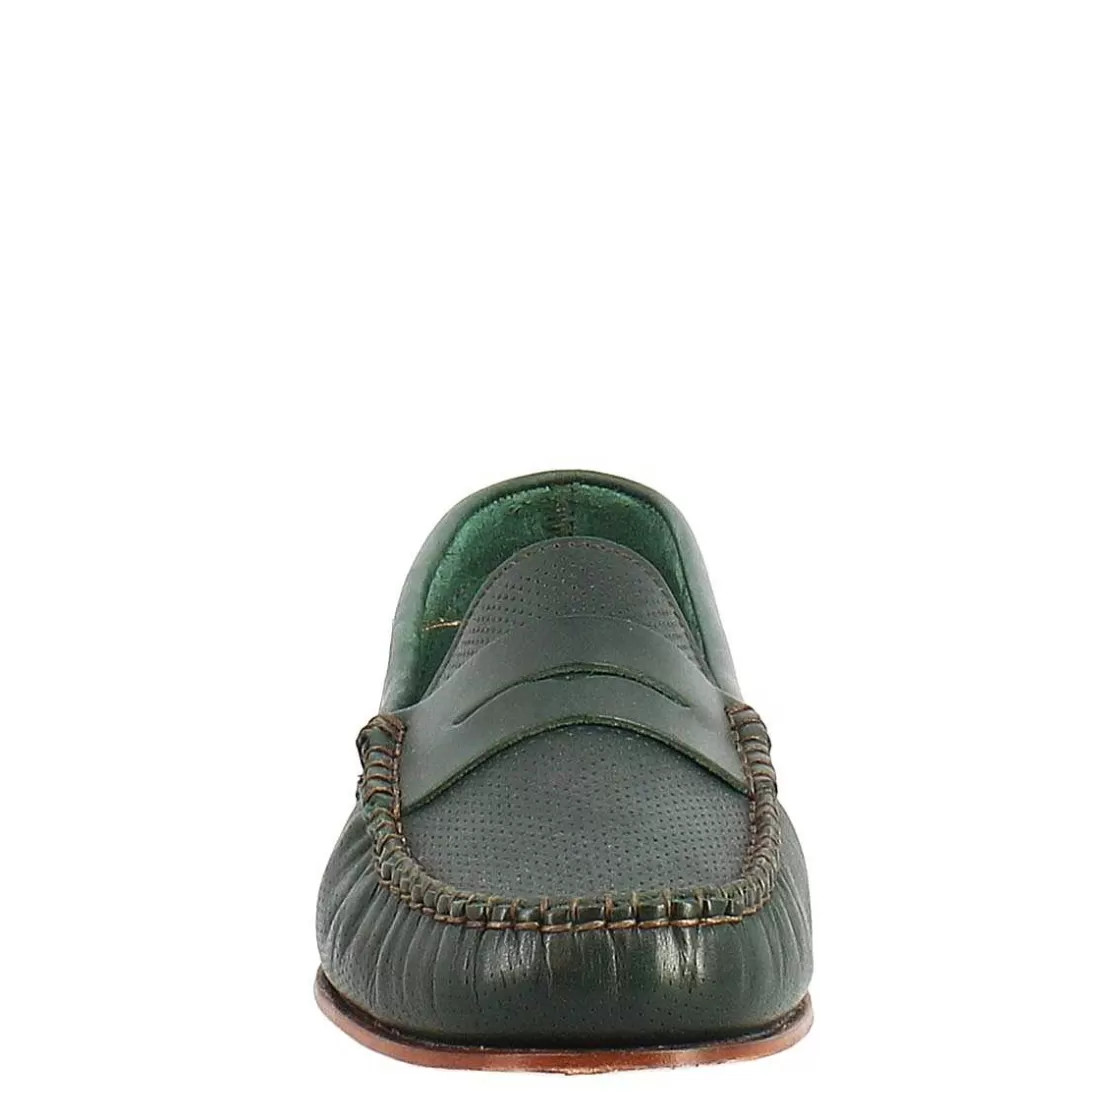 Leonardo Handmade College Loafers For Women In Green Perforated Leather Store